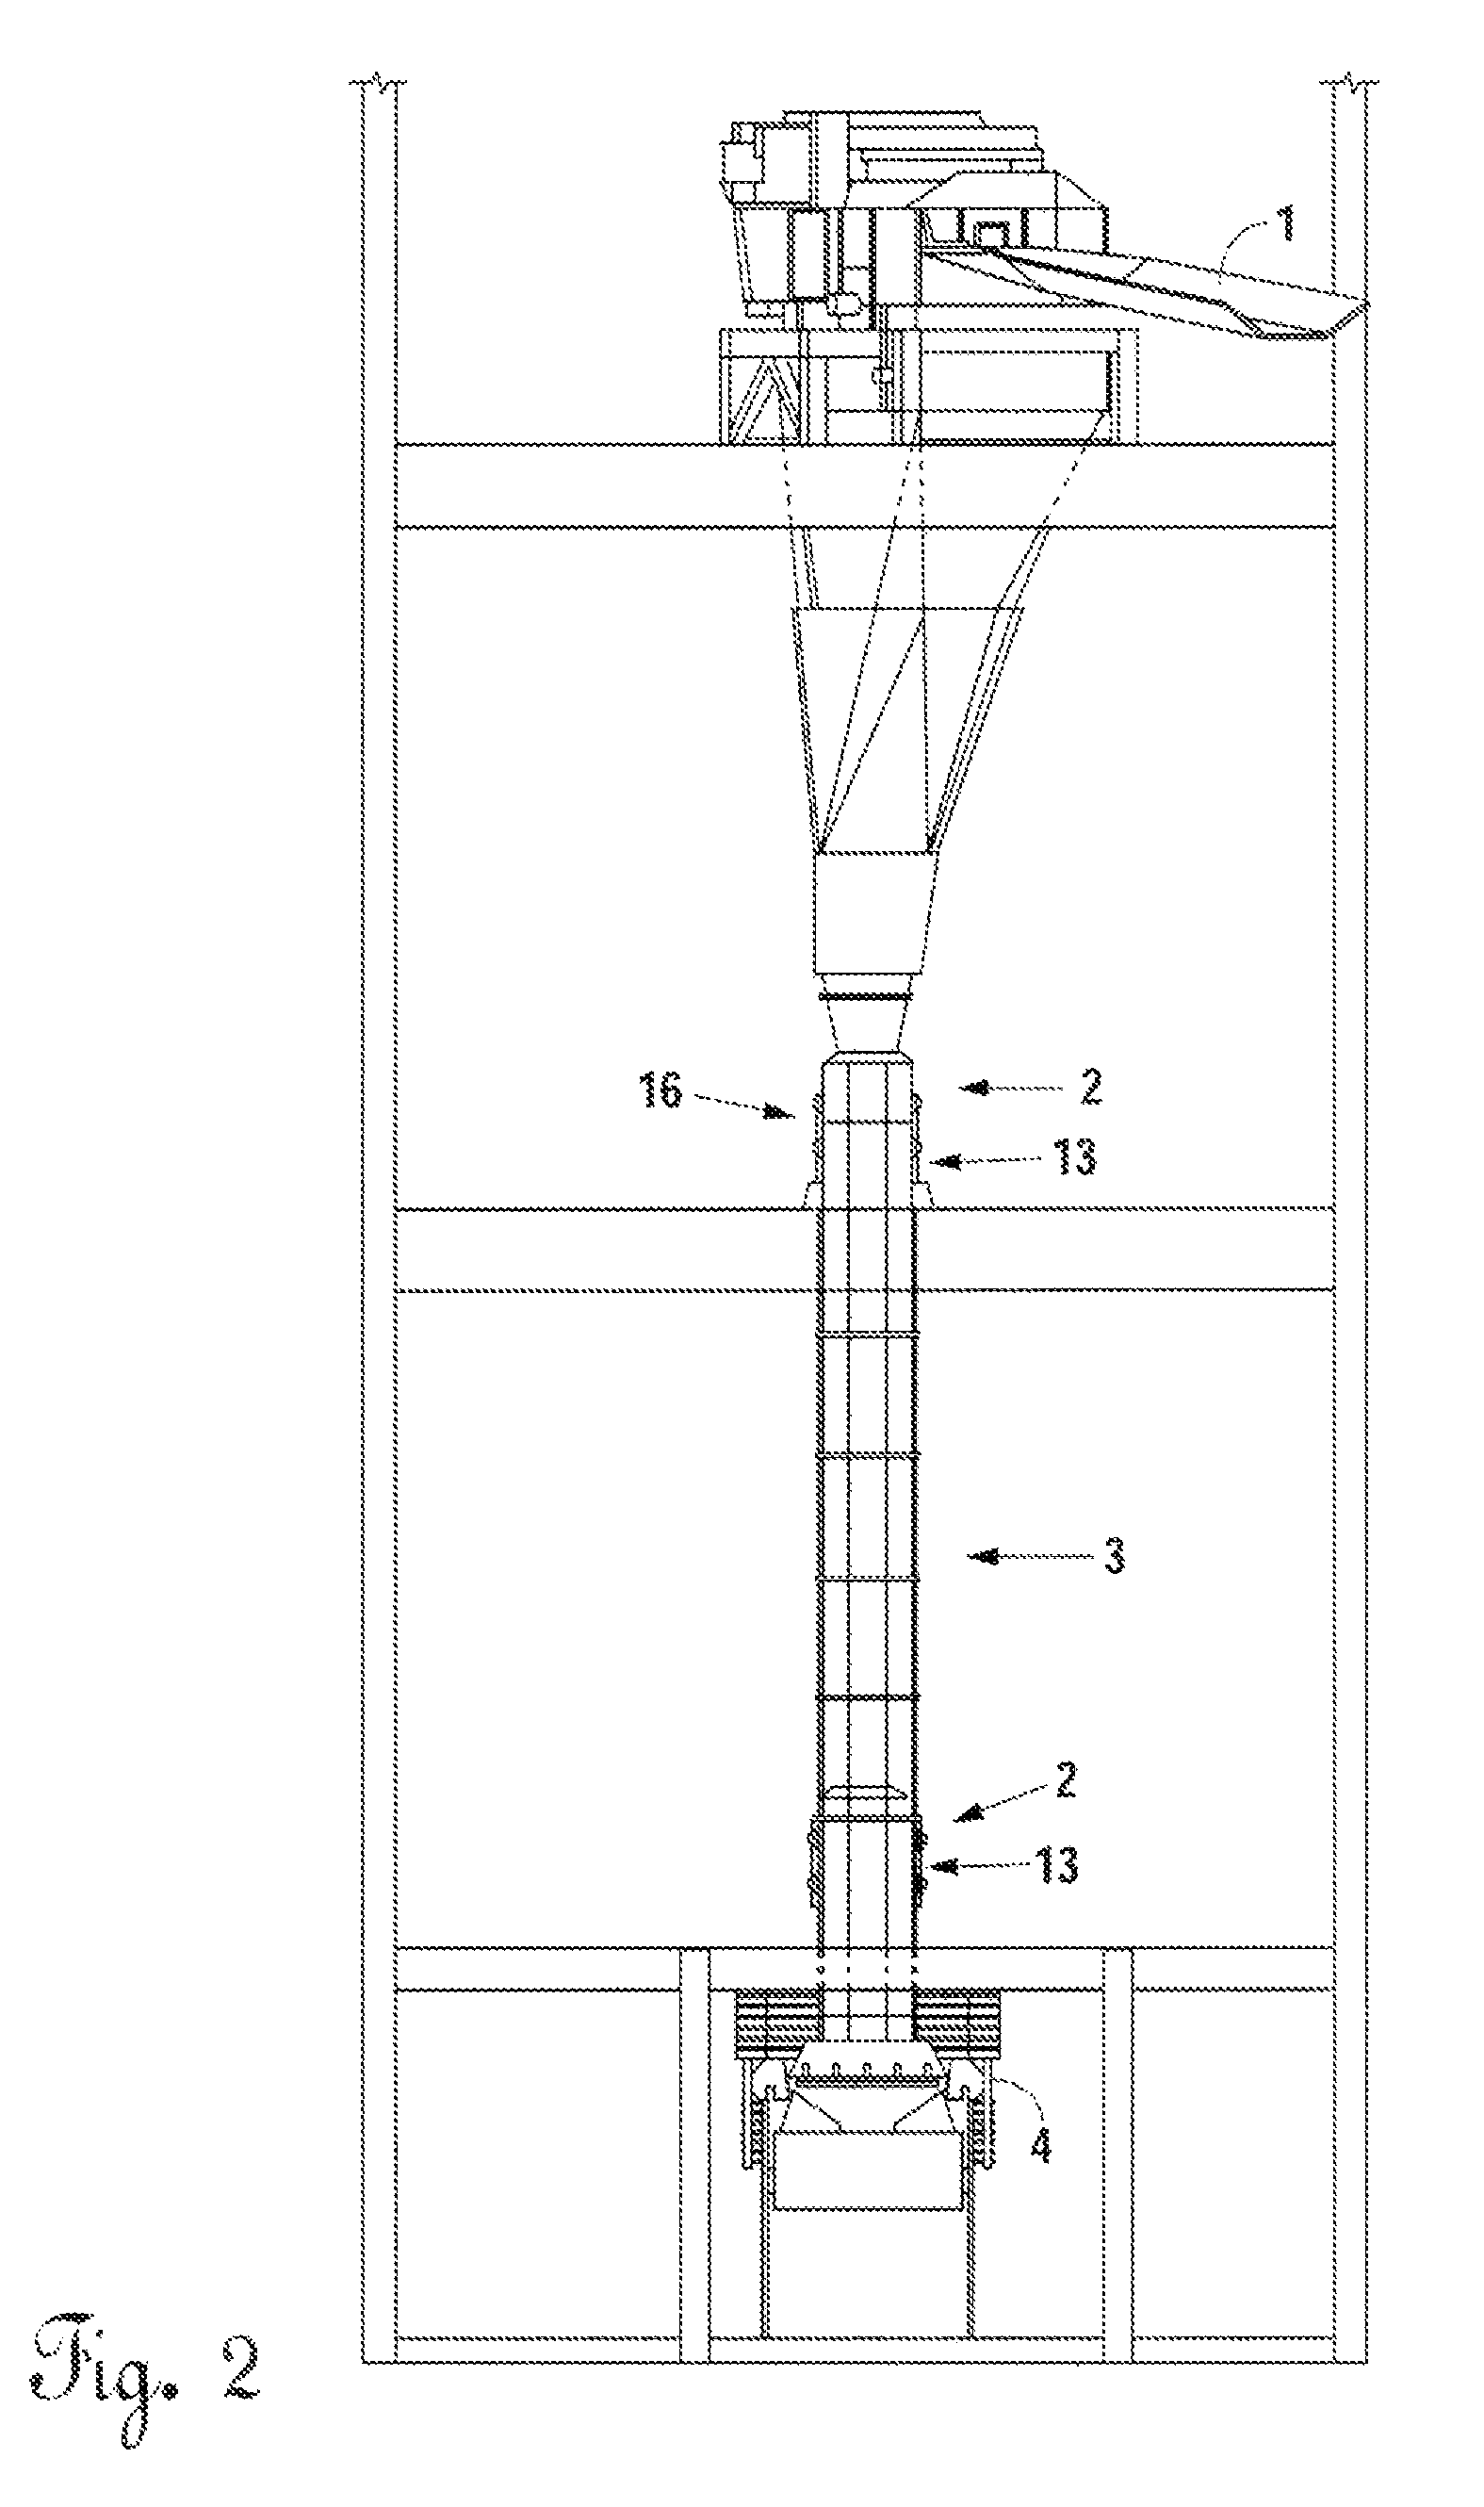 Apparatus and method for passive dust control in a transfer chute